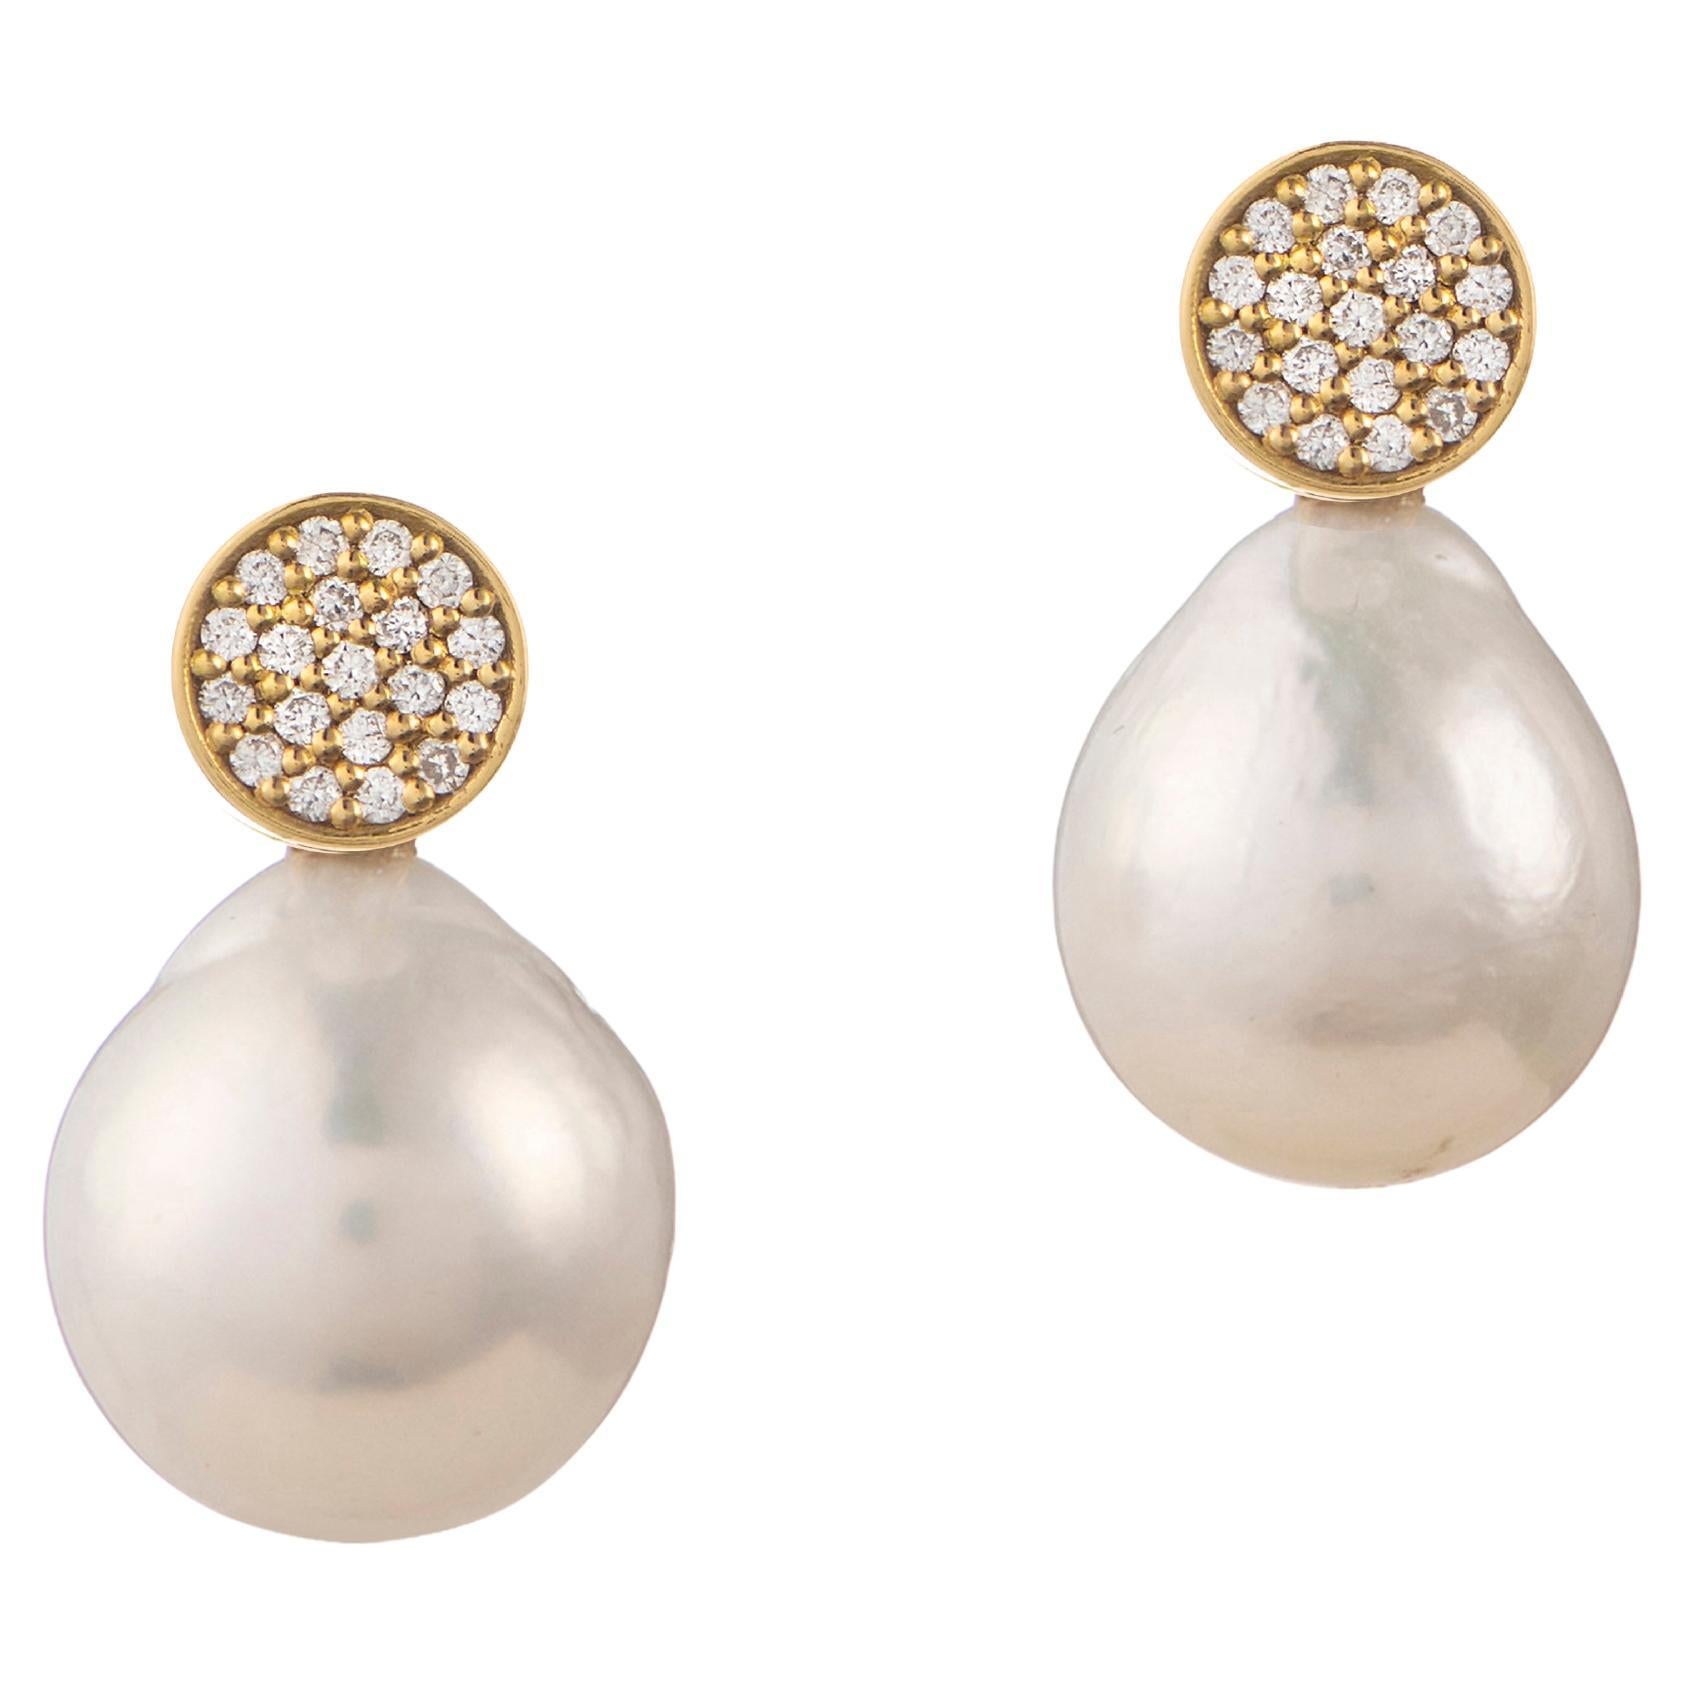 Diamond disk earrings with Detachable Baroque Pearls, 18K Gold